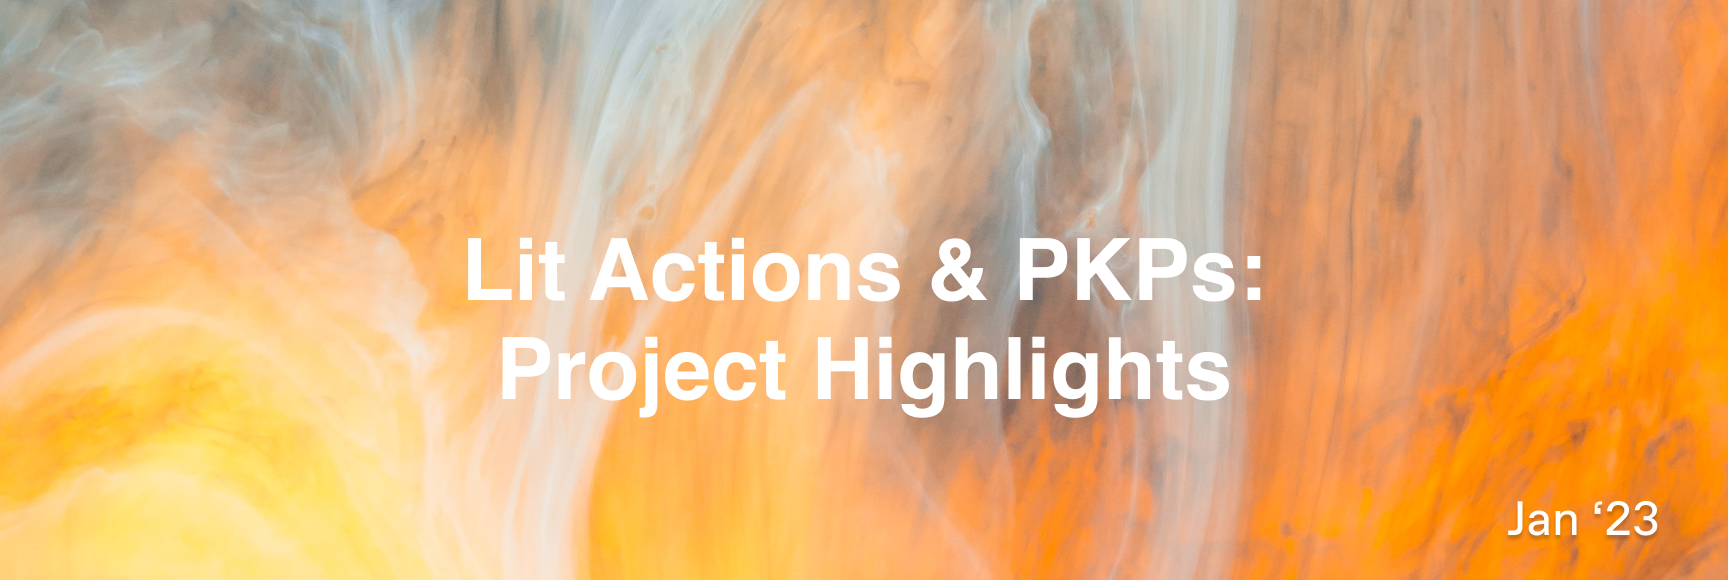 Lit Actions & PKPs: Jan '23 Project Highlights